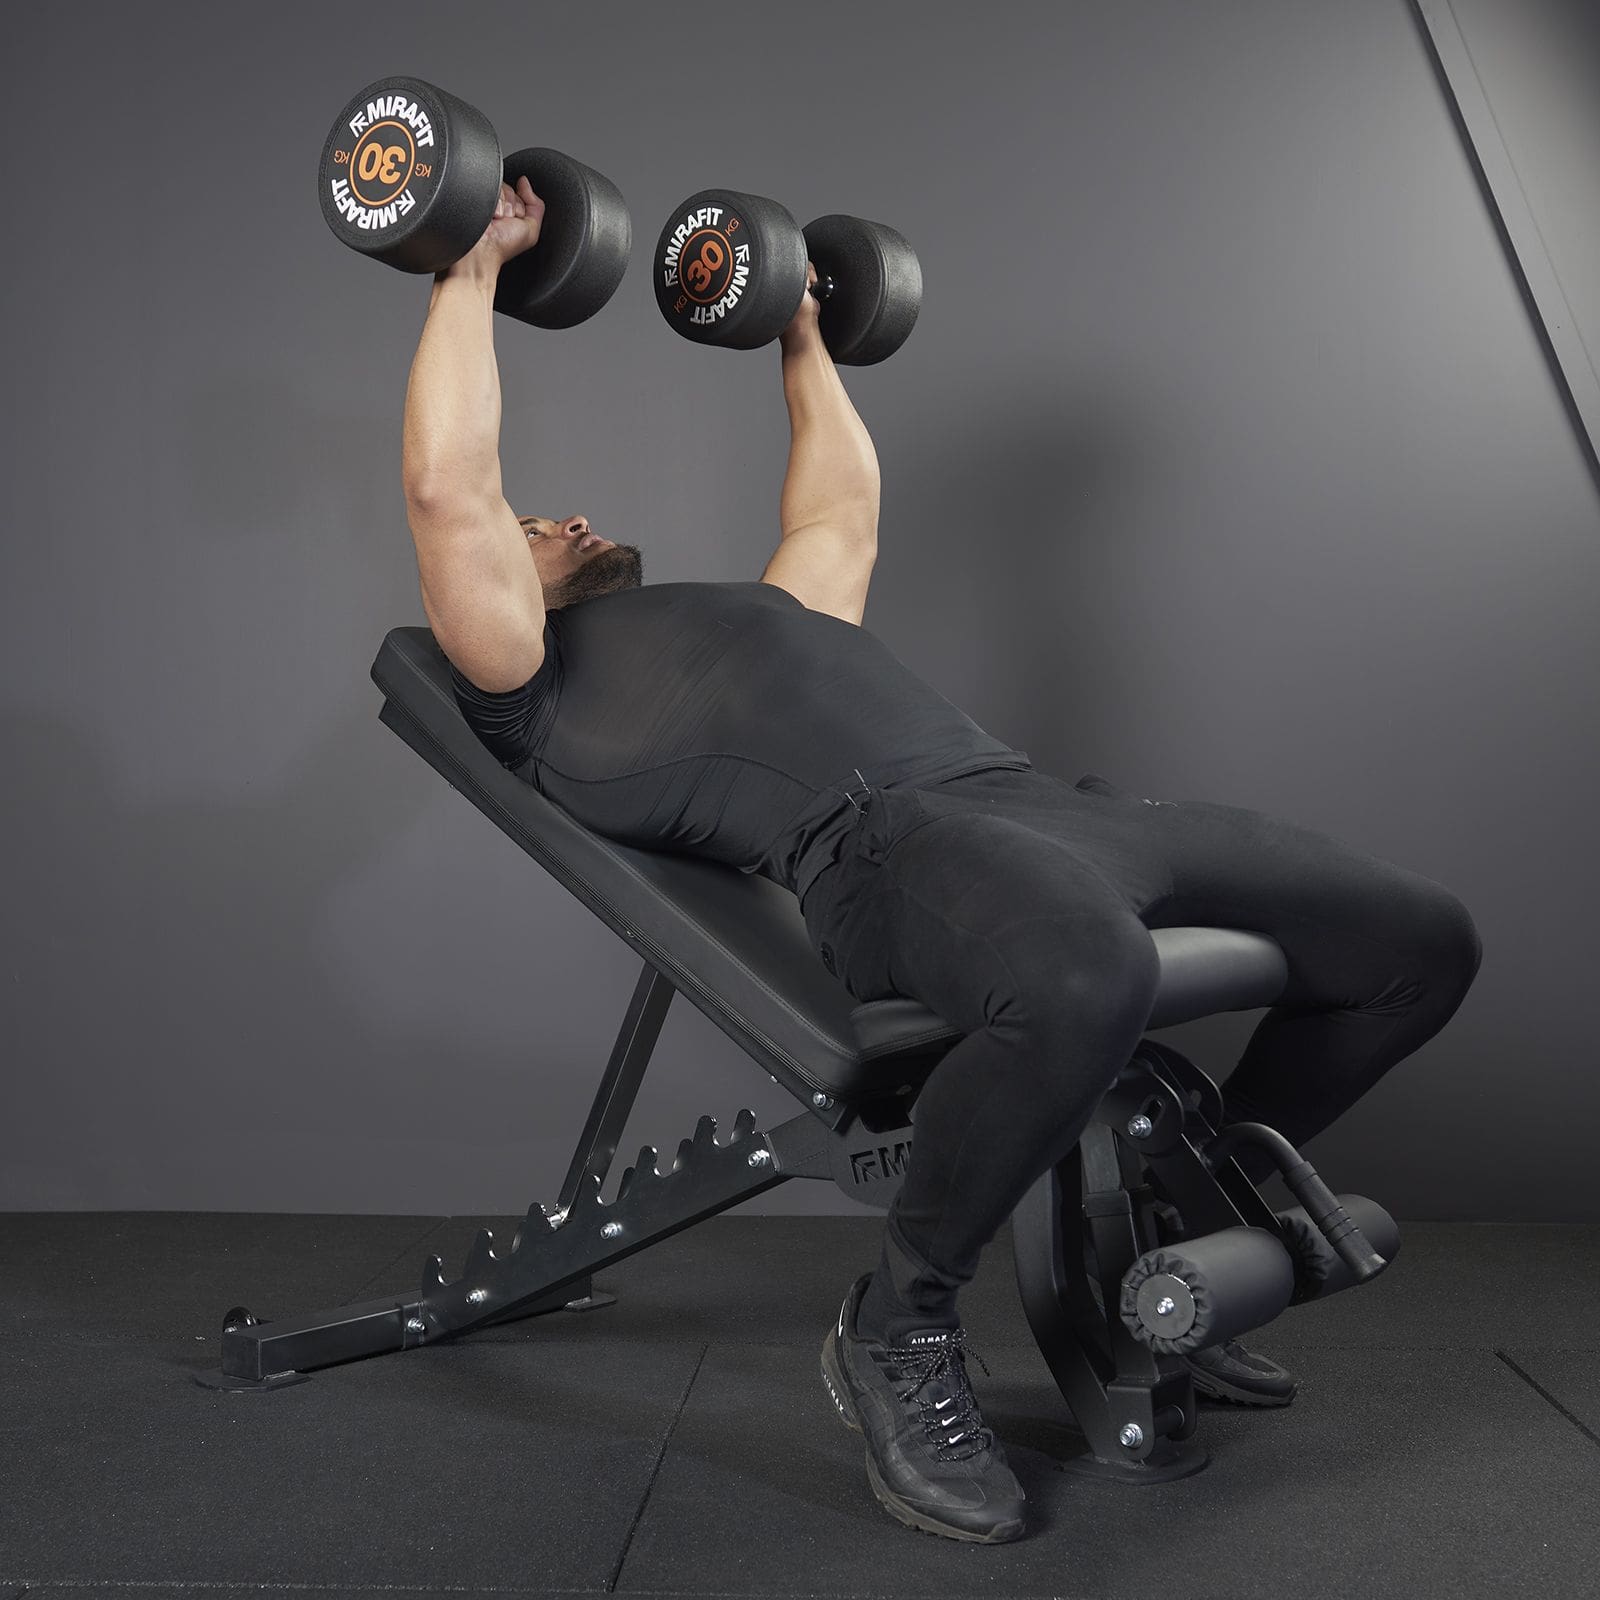 Mirafit M350 Adjustable Weight Bench Review